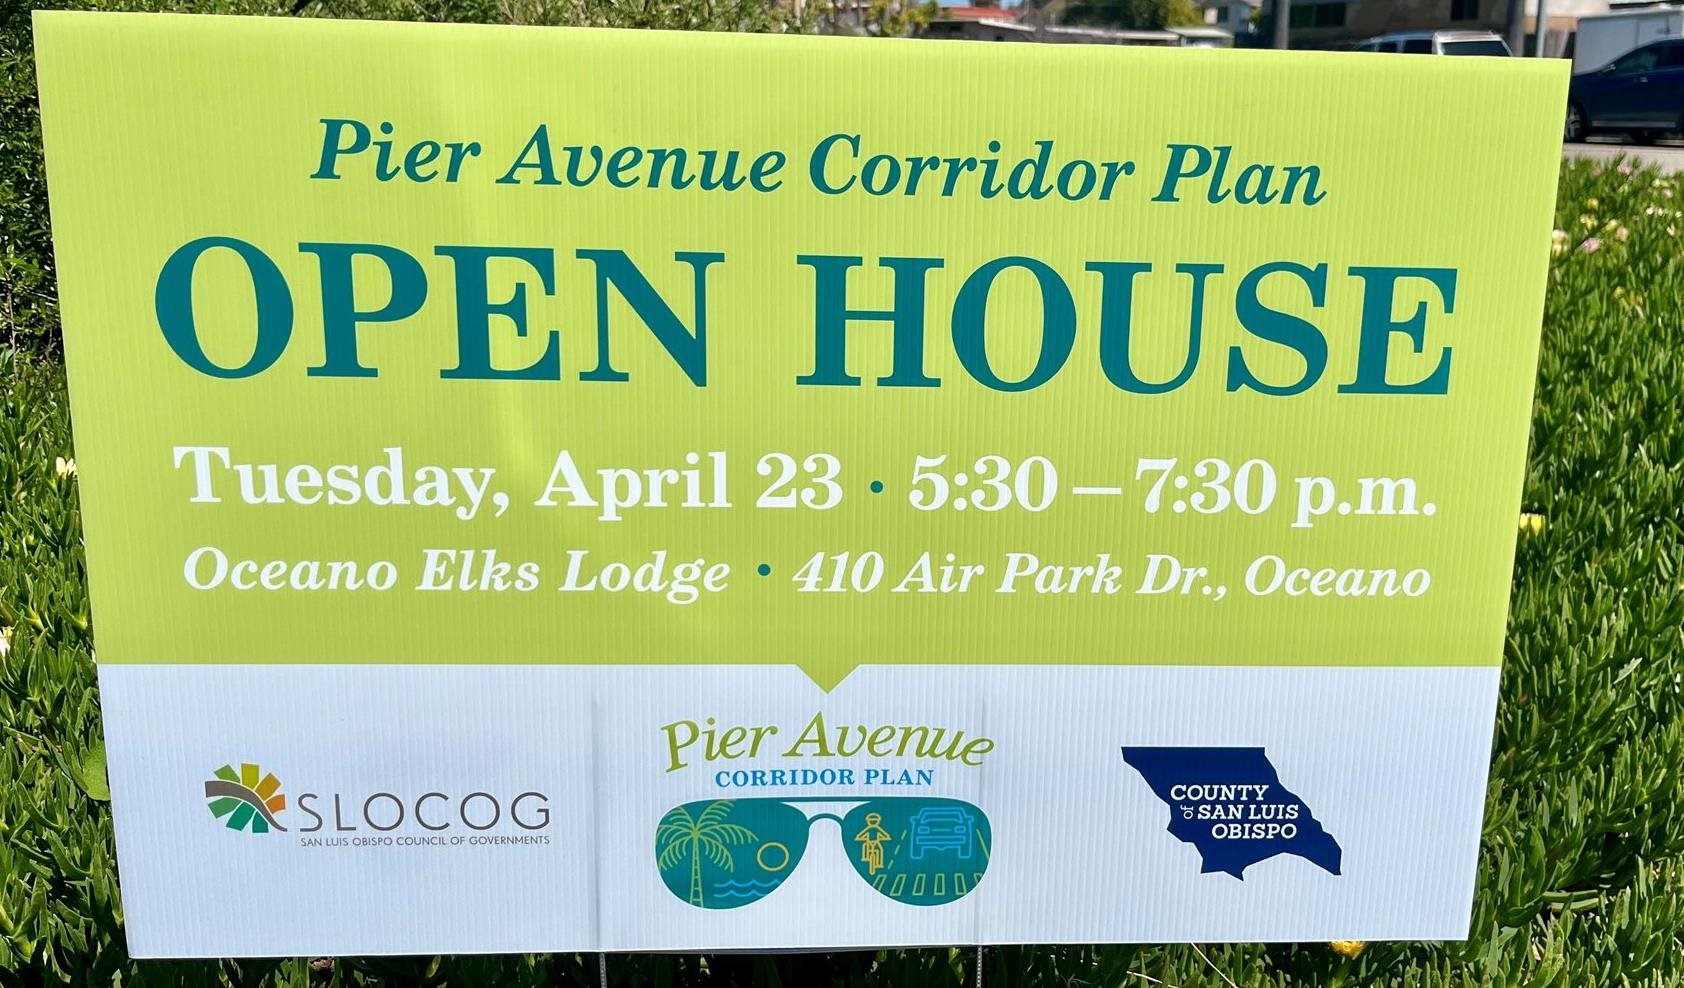 Open house sign Click to view article, Open House Set for Pier Avenue Corridor Plan